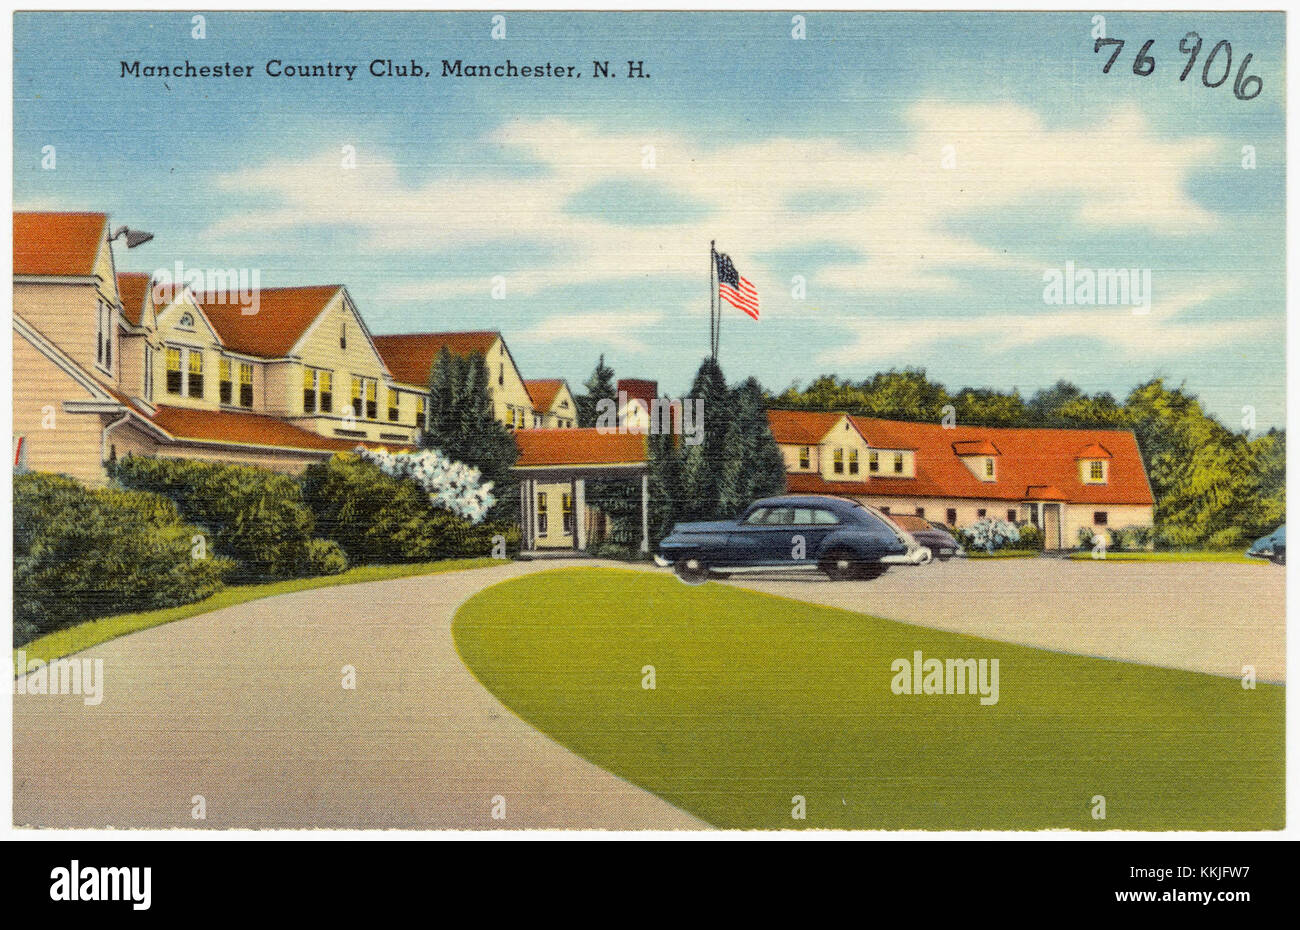 Manchester Country Club, Manchester, N.H (76906) Foto Stock